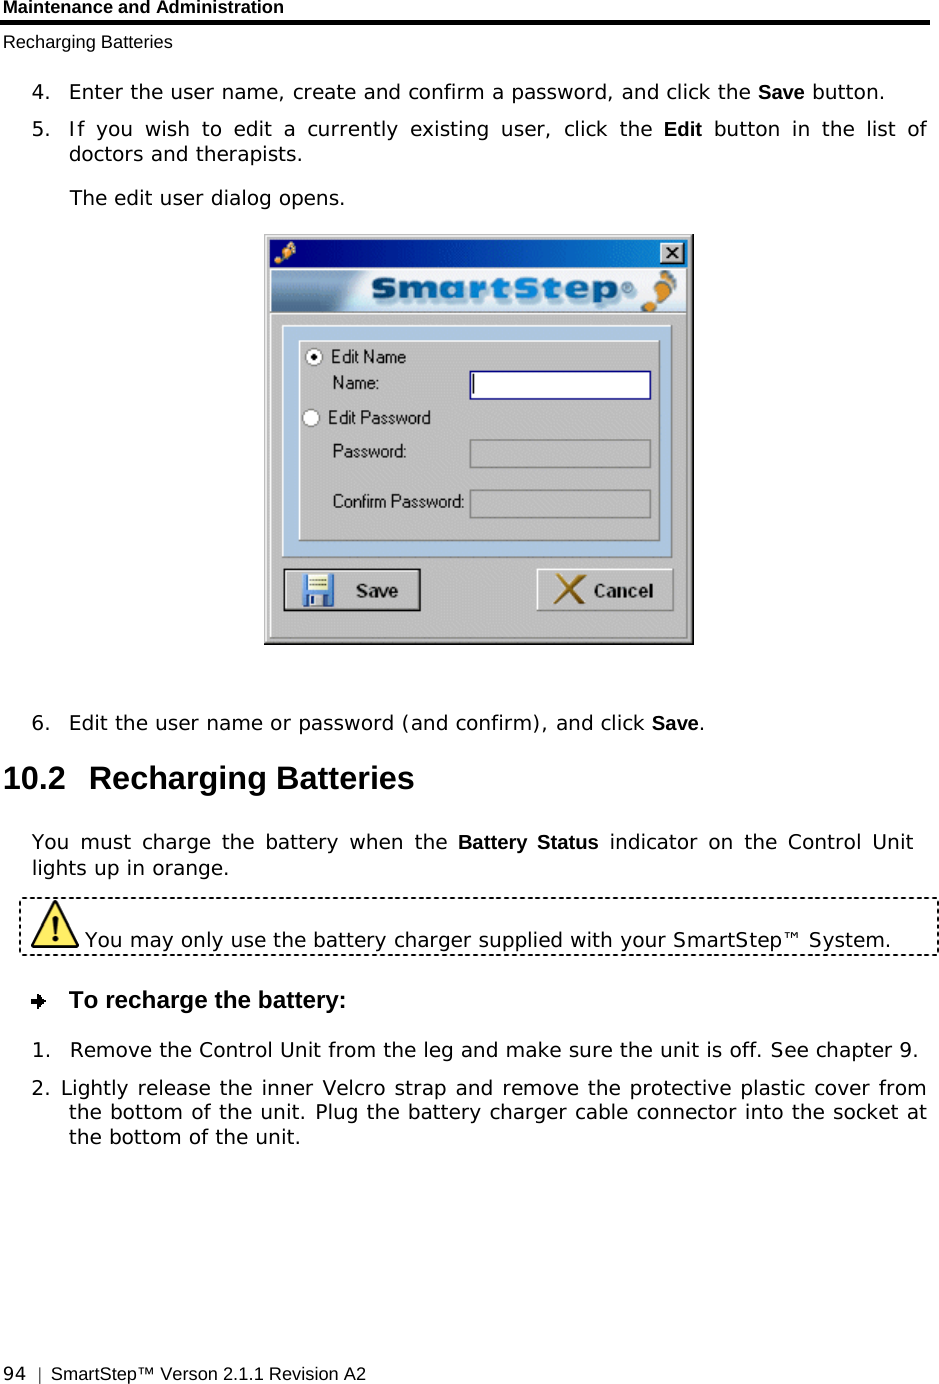 Maintenance and Administration Recharging Batteries  94  |  SmartStep™ Verson 2.1.1 Revision A2   4.  Enter the user name, create and confirm a password, and click the Save button. 5.  If you wish to edit a currently existing user, click the Edit button in the list of doctors and therapists. The edit user dialog opens.   6.  Edit the user name or password (and confirm), and click Save. 10.2 Recharging Batteries You must charge the battery when the Battery Status indicator on the Control Unit lights up in orange.  You may only use the battery charger supplied with your SmartStep™ System.   To recharge the battery: 1.  Remove the Control Unit from the leg and make sure the unit is off. See chapter  9.  2. Lightly release the inner Velcro strap and remove the protective plastic cover from    the bottom of the unit. Plug the battery charger cable connector into the socket at the bottom of the unit.  